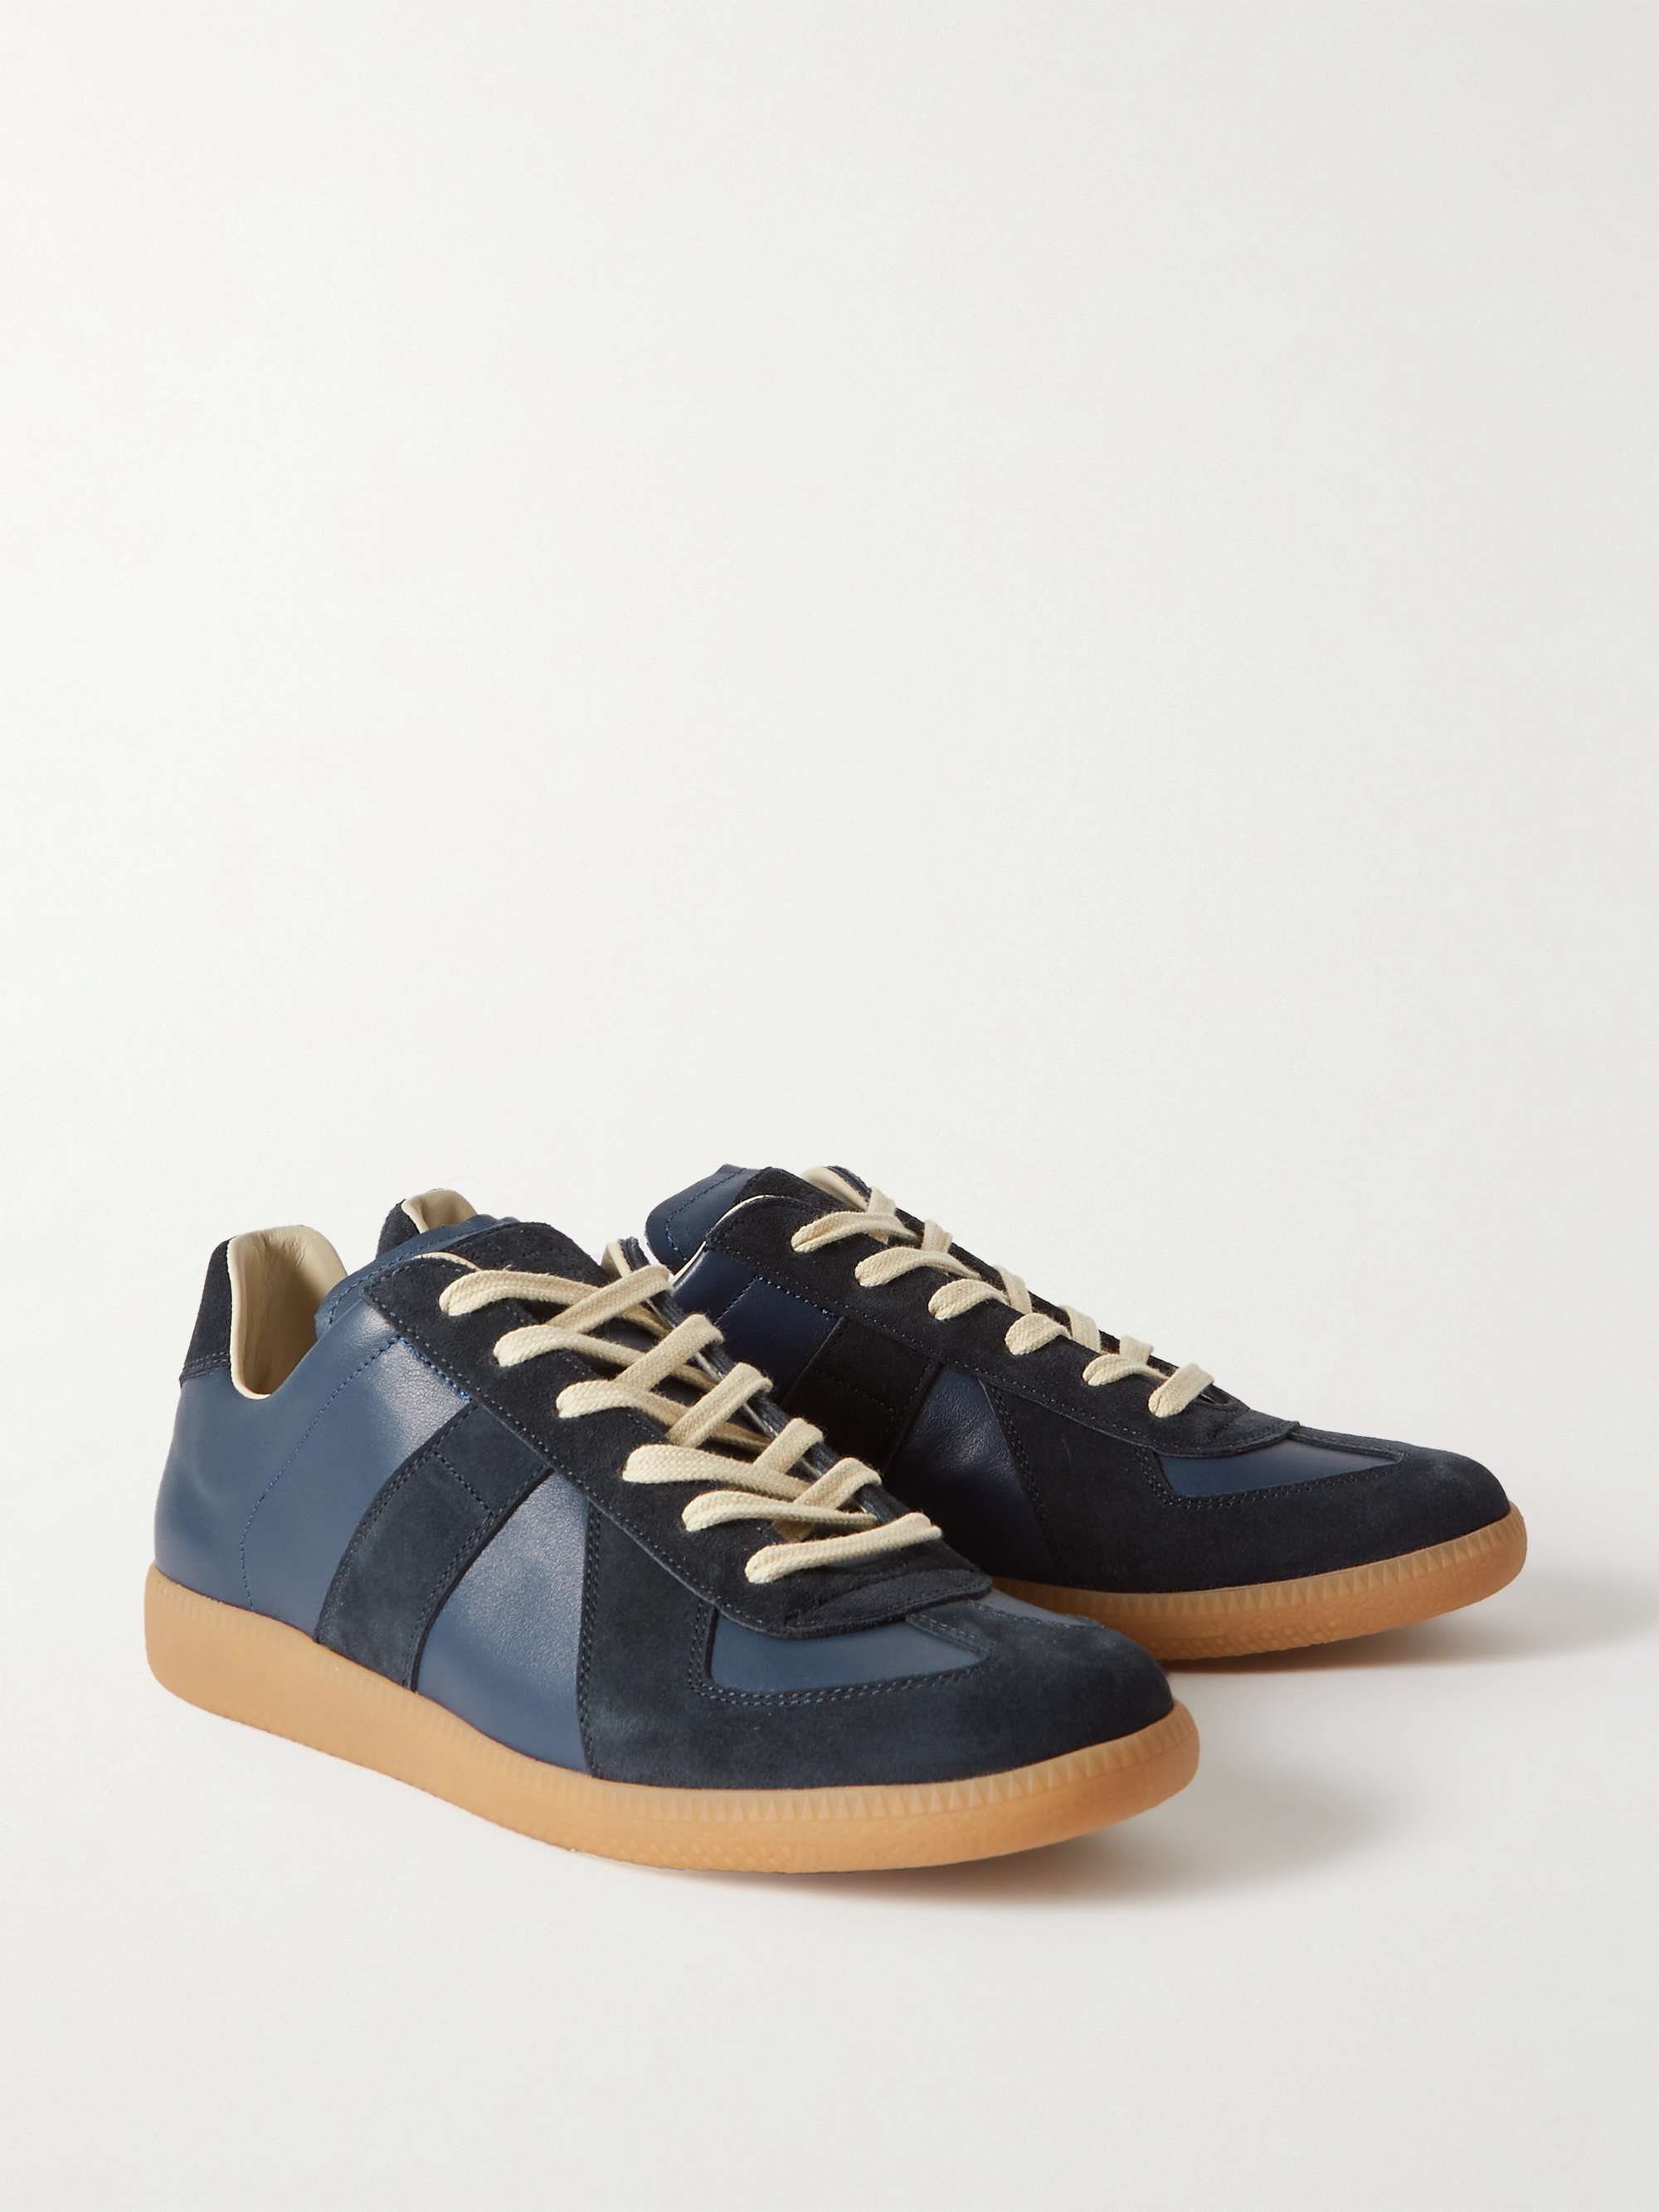 MAISON MARGIELA Replica Leather and Suede Sneakers